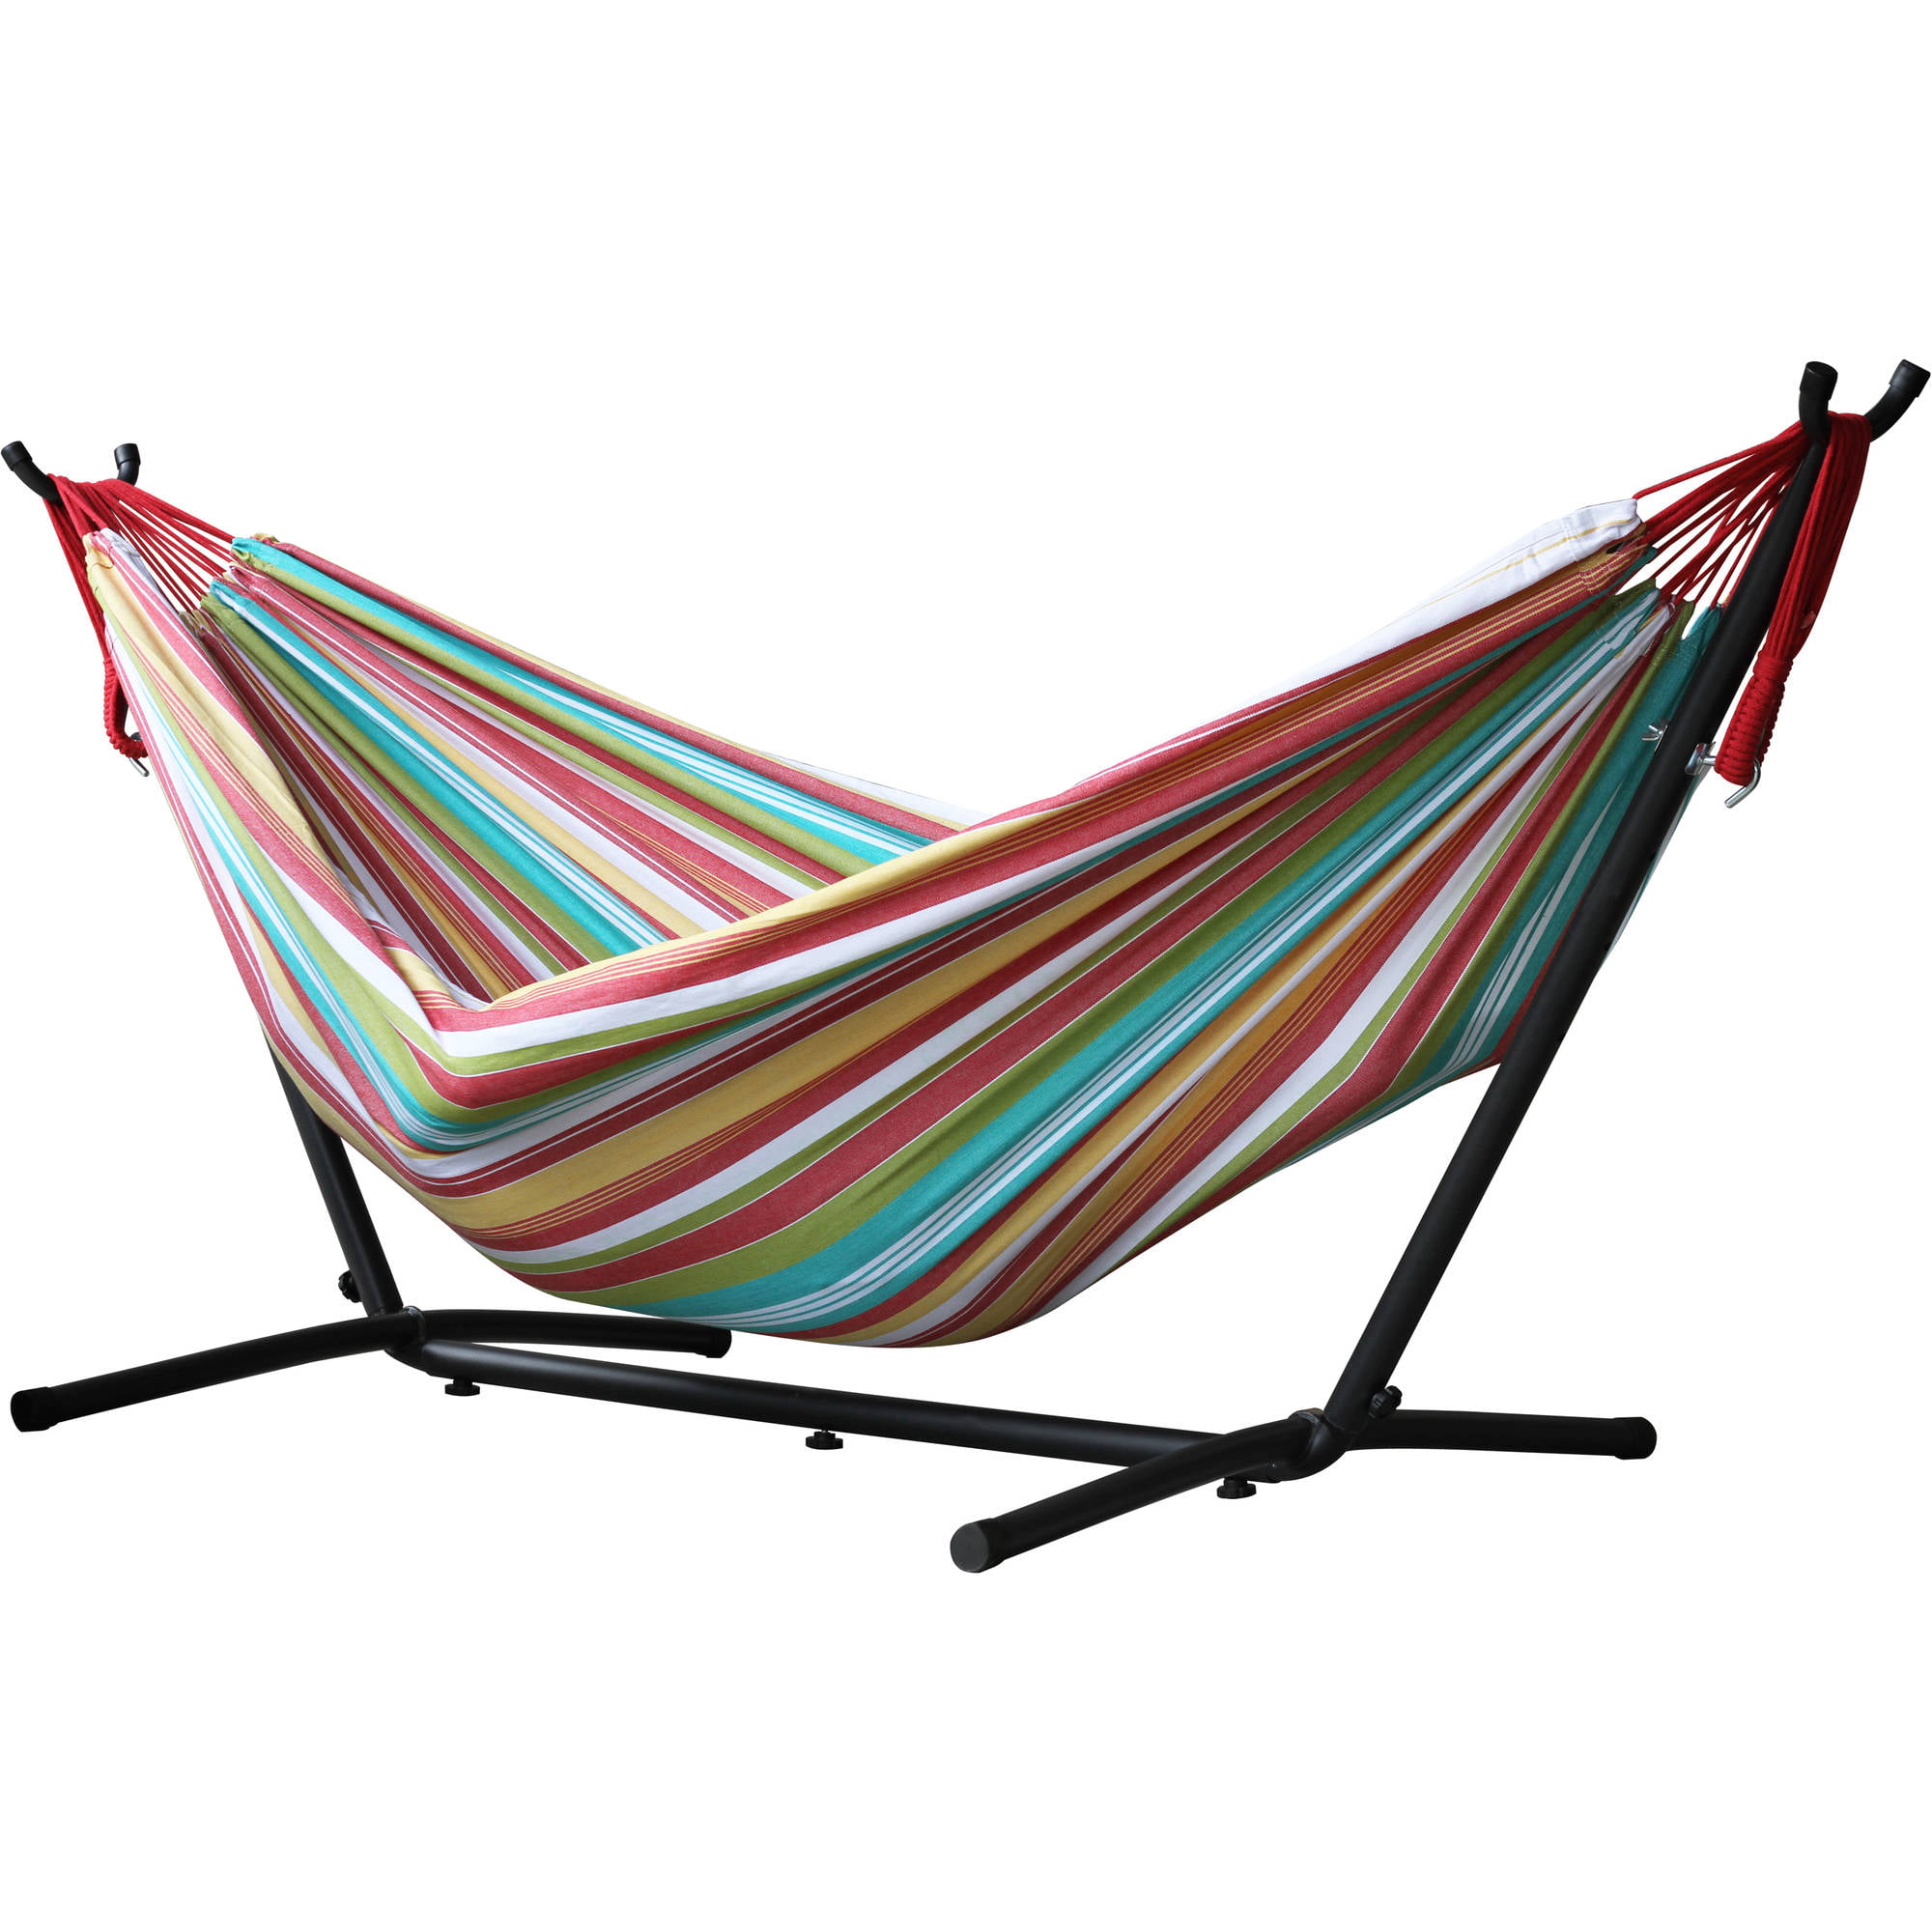 109x46x43 Vivere UHSDO9-26 Hammock w/ Space Saving Steel Stand (Multi-Color, Double) $49.97 + Free Shipping